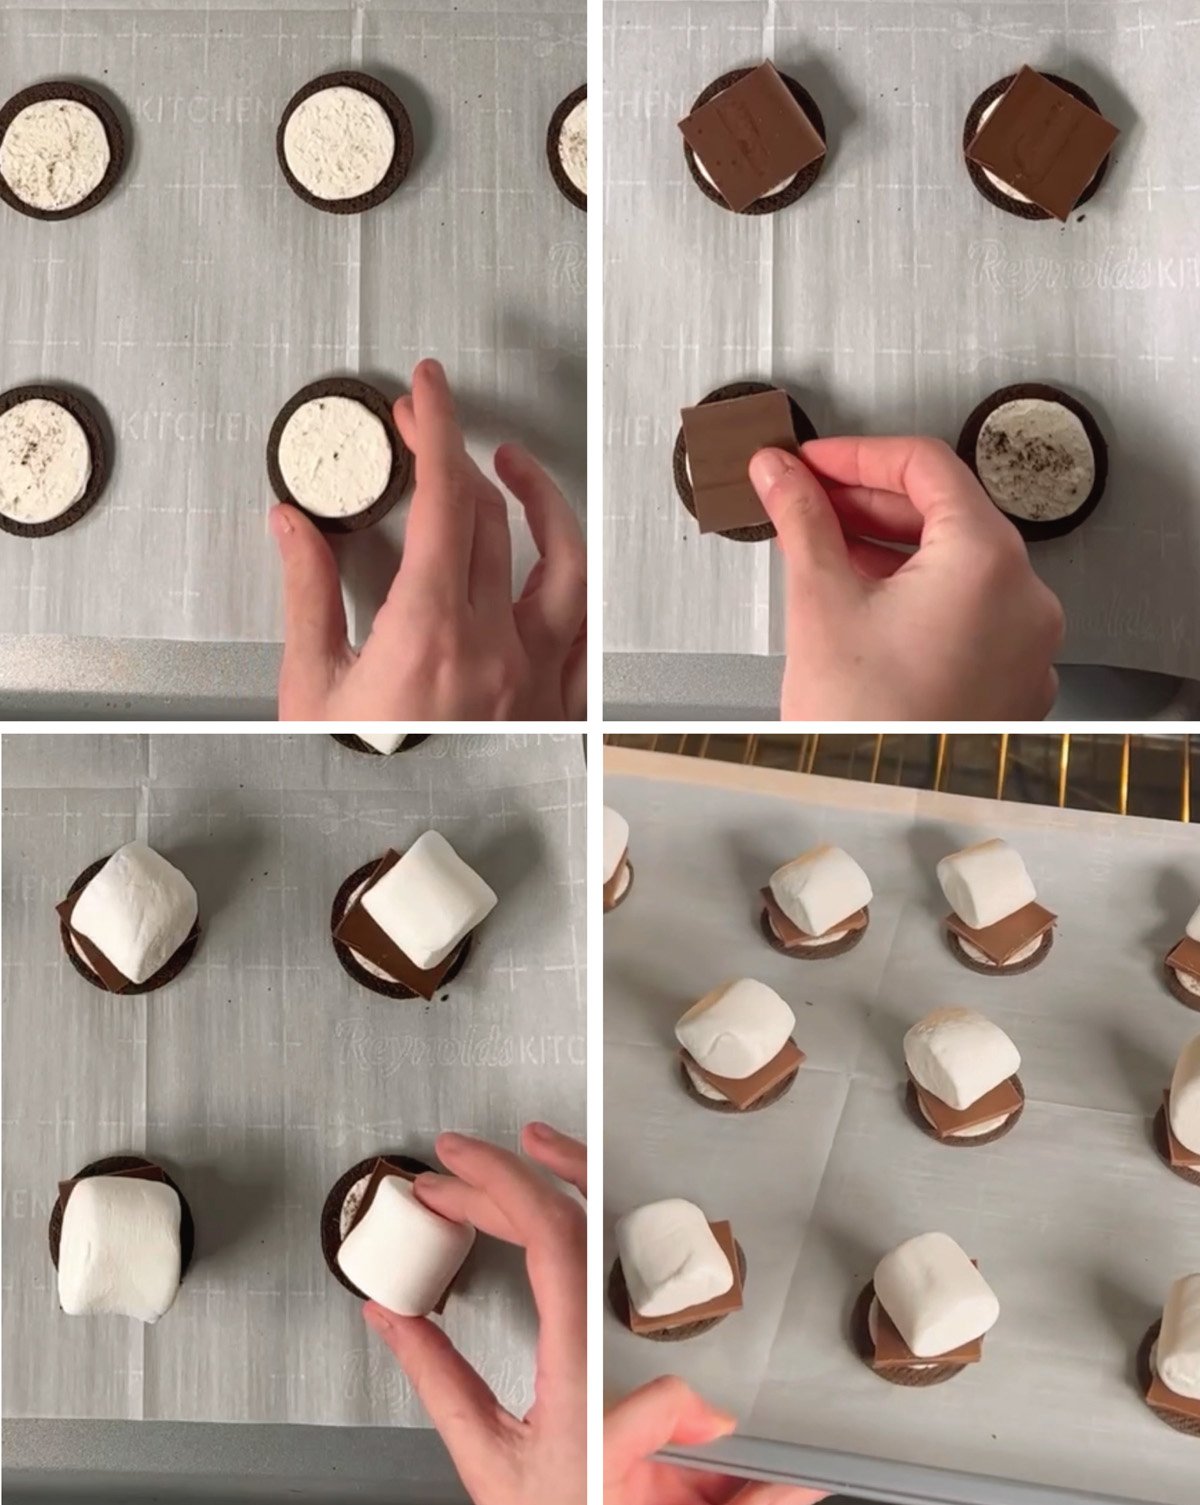 Easy oreo s'mores made in the oven.